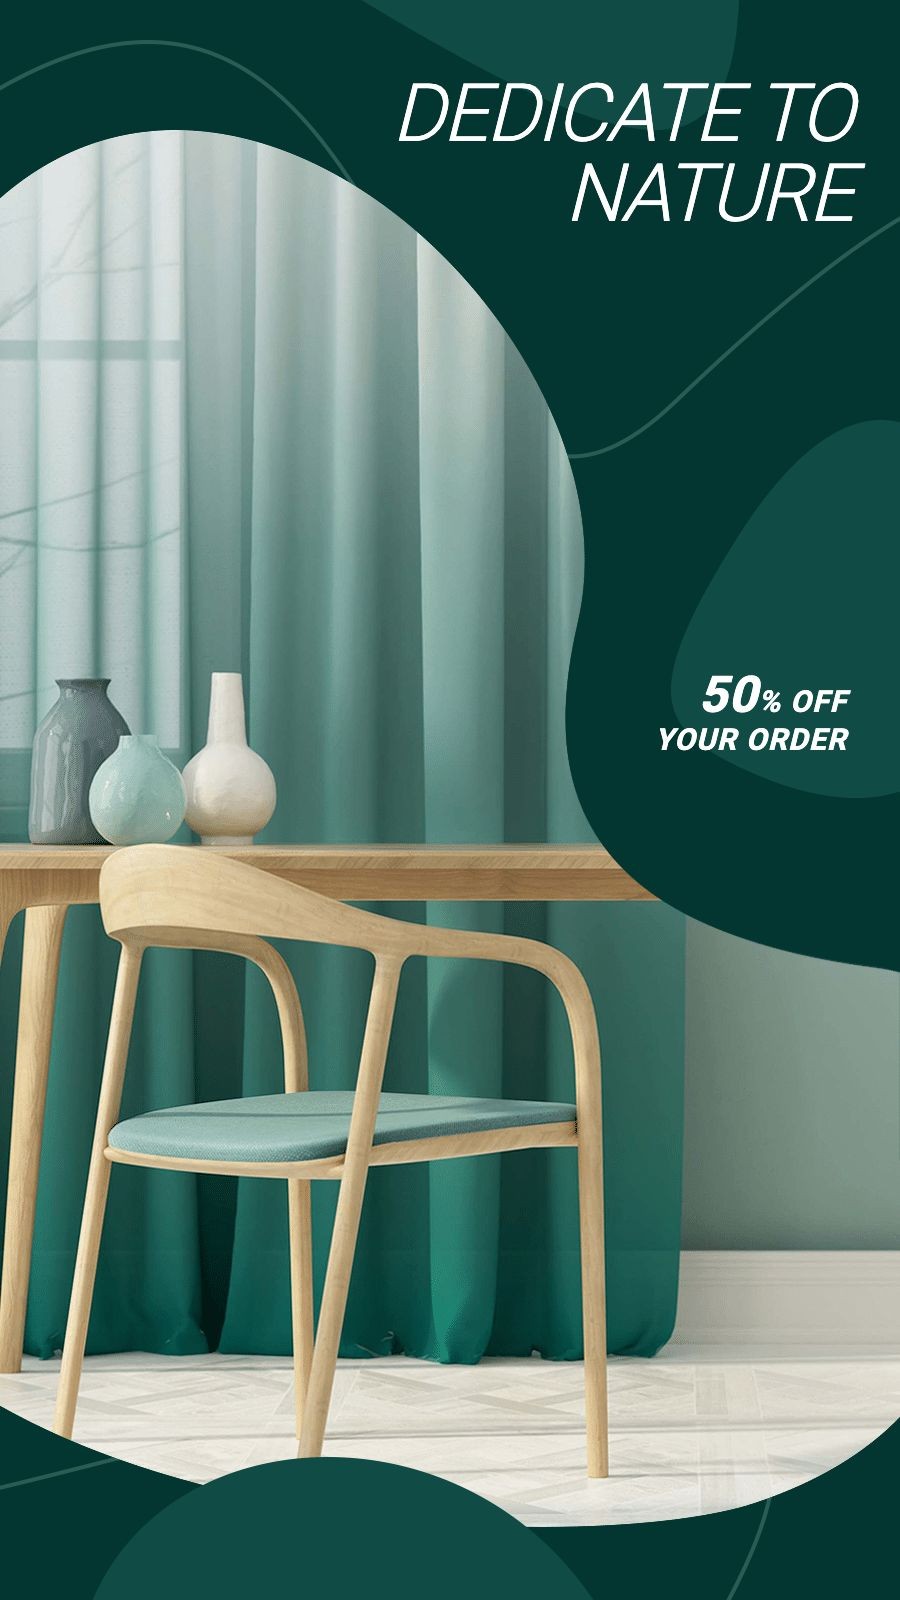 Green Linear Geometry Design Home Furniture Discount Sale Promotion Ecommerce Story